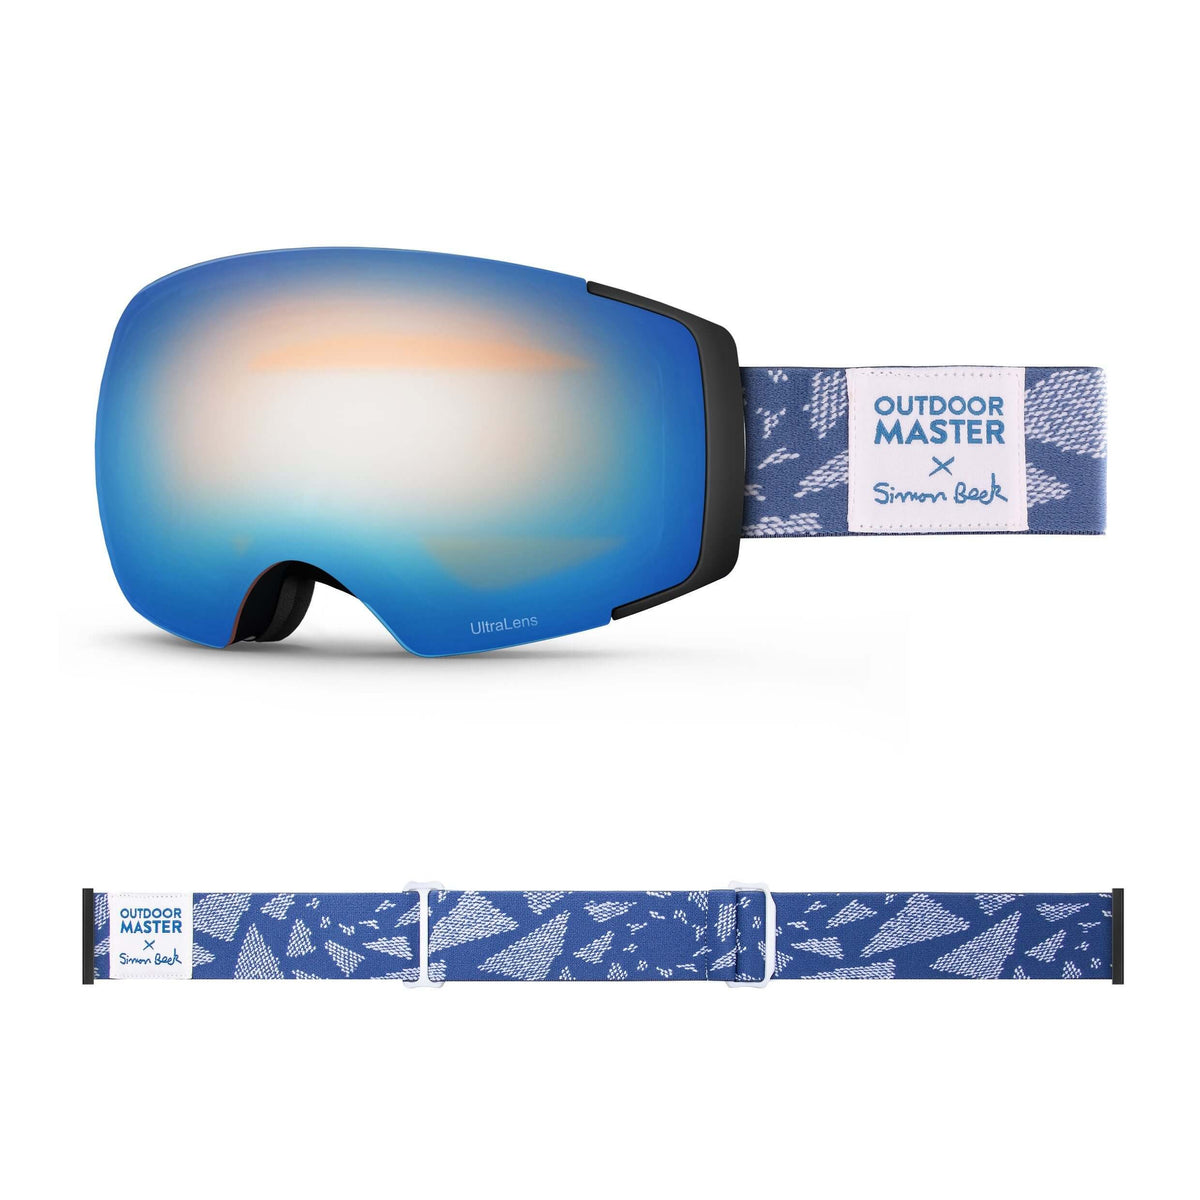 OutdoorMaster x Simon Beck Ski Goggles Pro Series - Snowshoeing Art Limited Edition OutdoorMaster UltraLens VLT 22% Optimized Orange with REVO Sapphire Flying Triangles